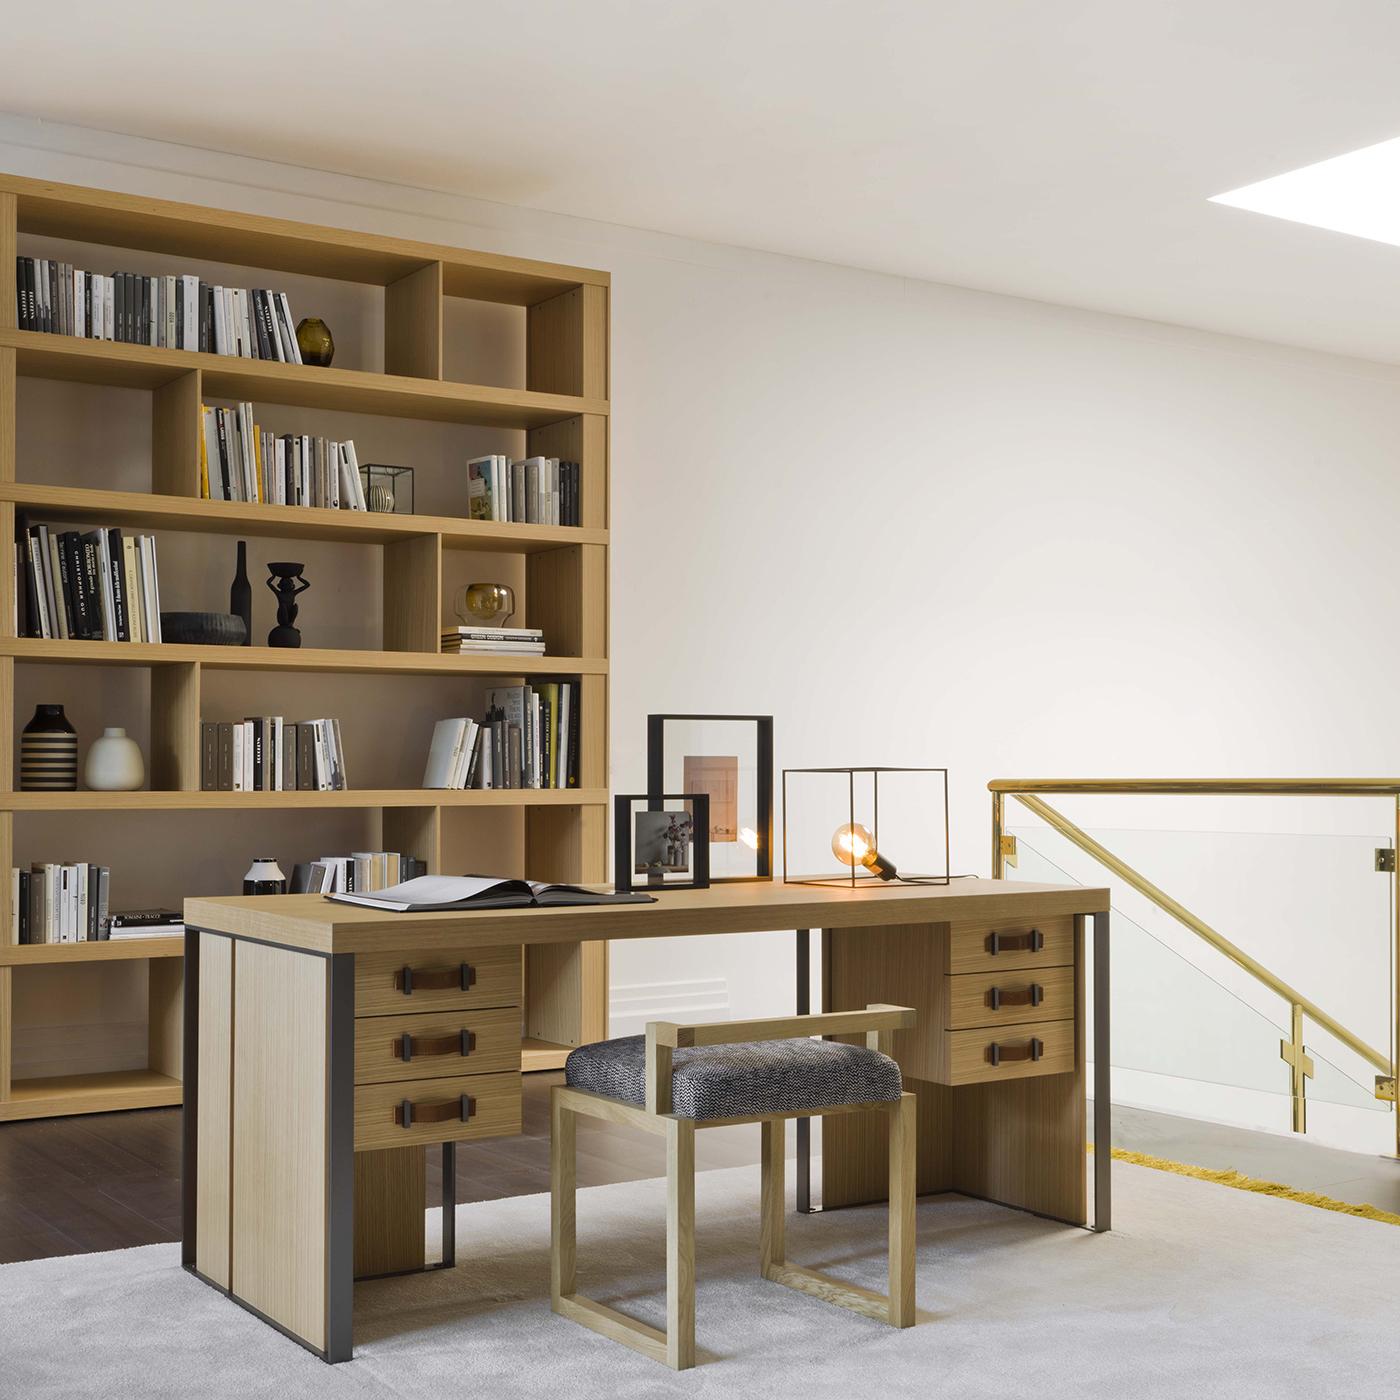 Contemporary Kobe Durmast Desk with Drawers